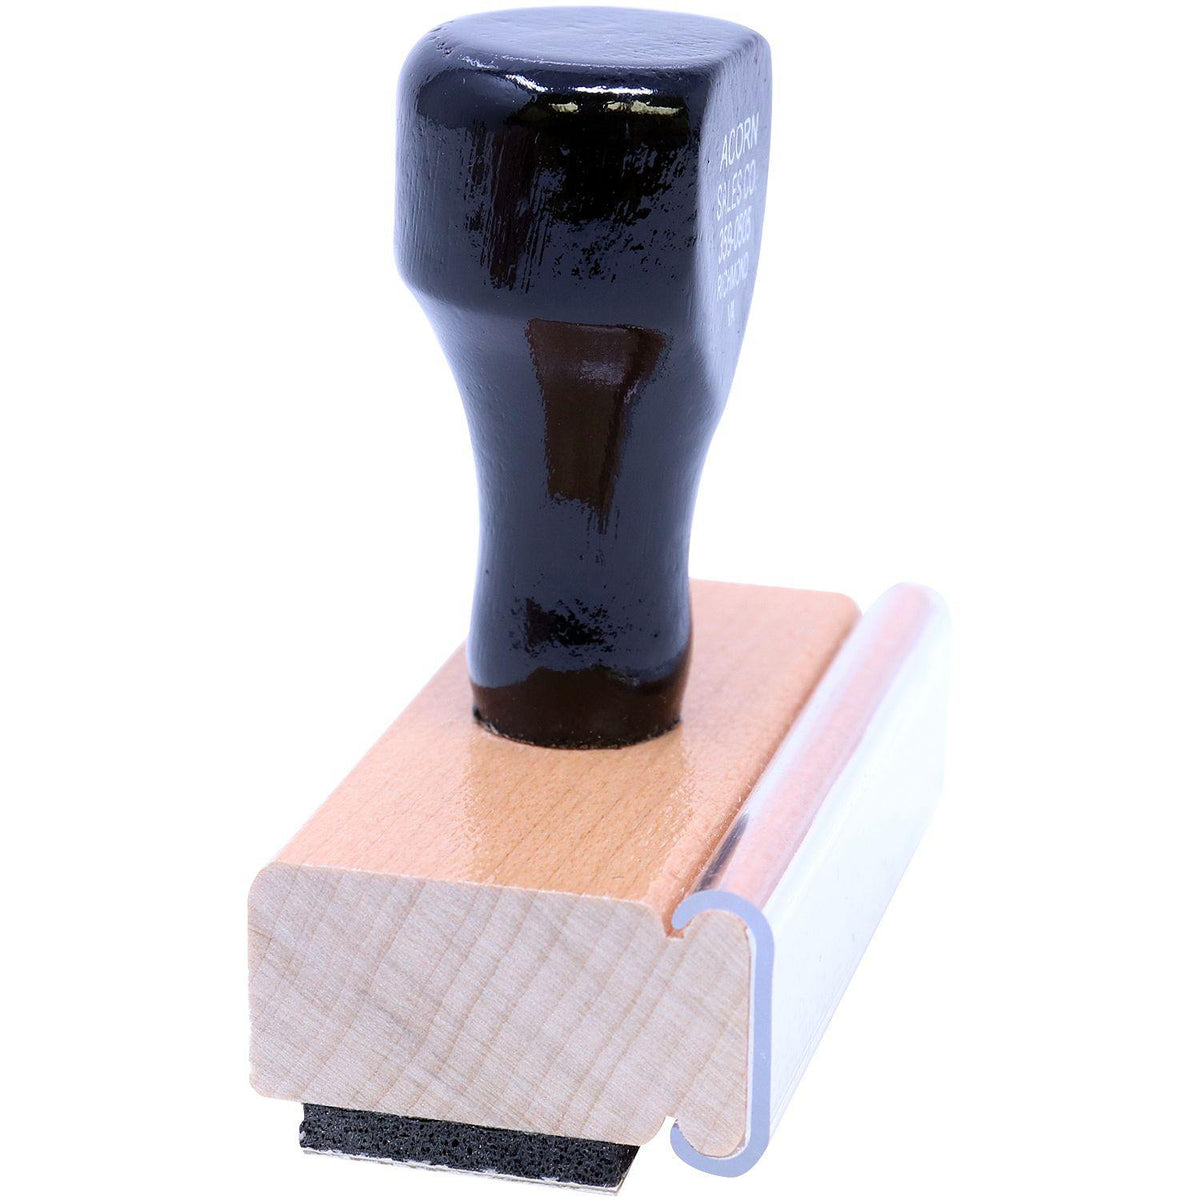 Side View of Homework Complete Rubber Stamp at an Angle